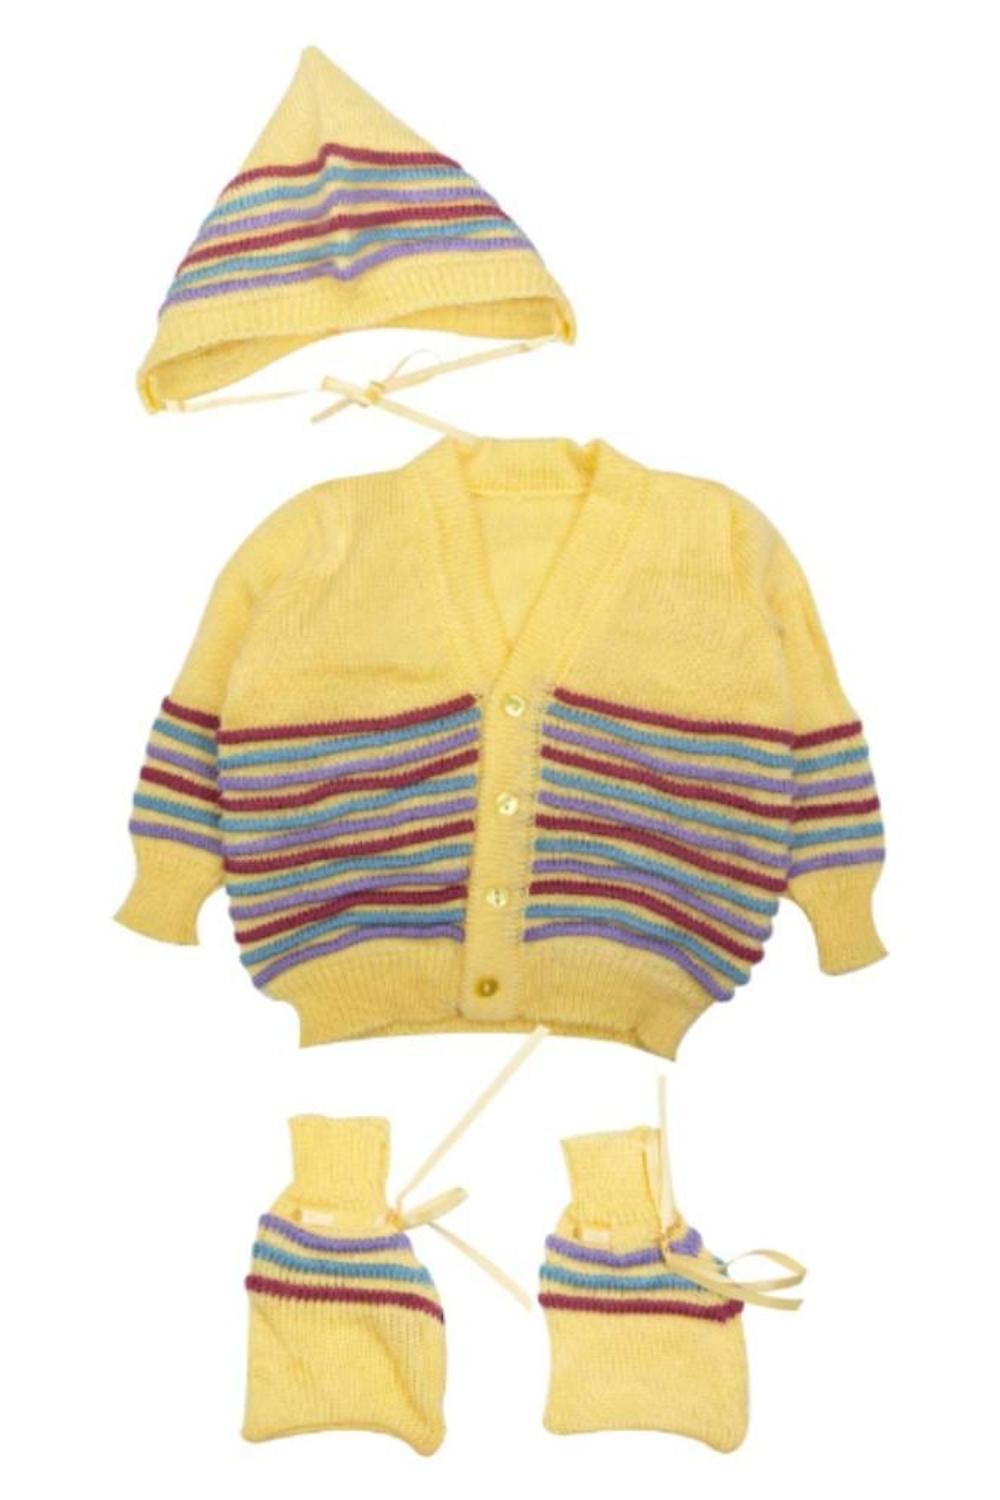 Mee Mee Baby Sweater Sets (Yellow)